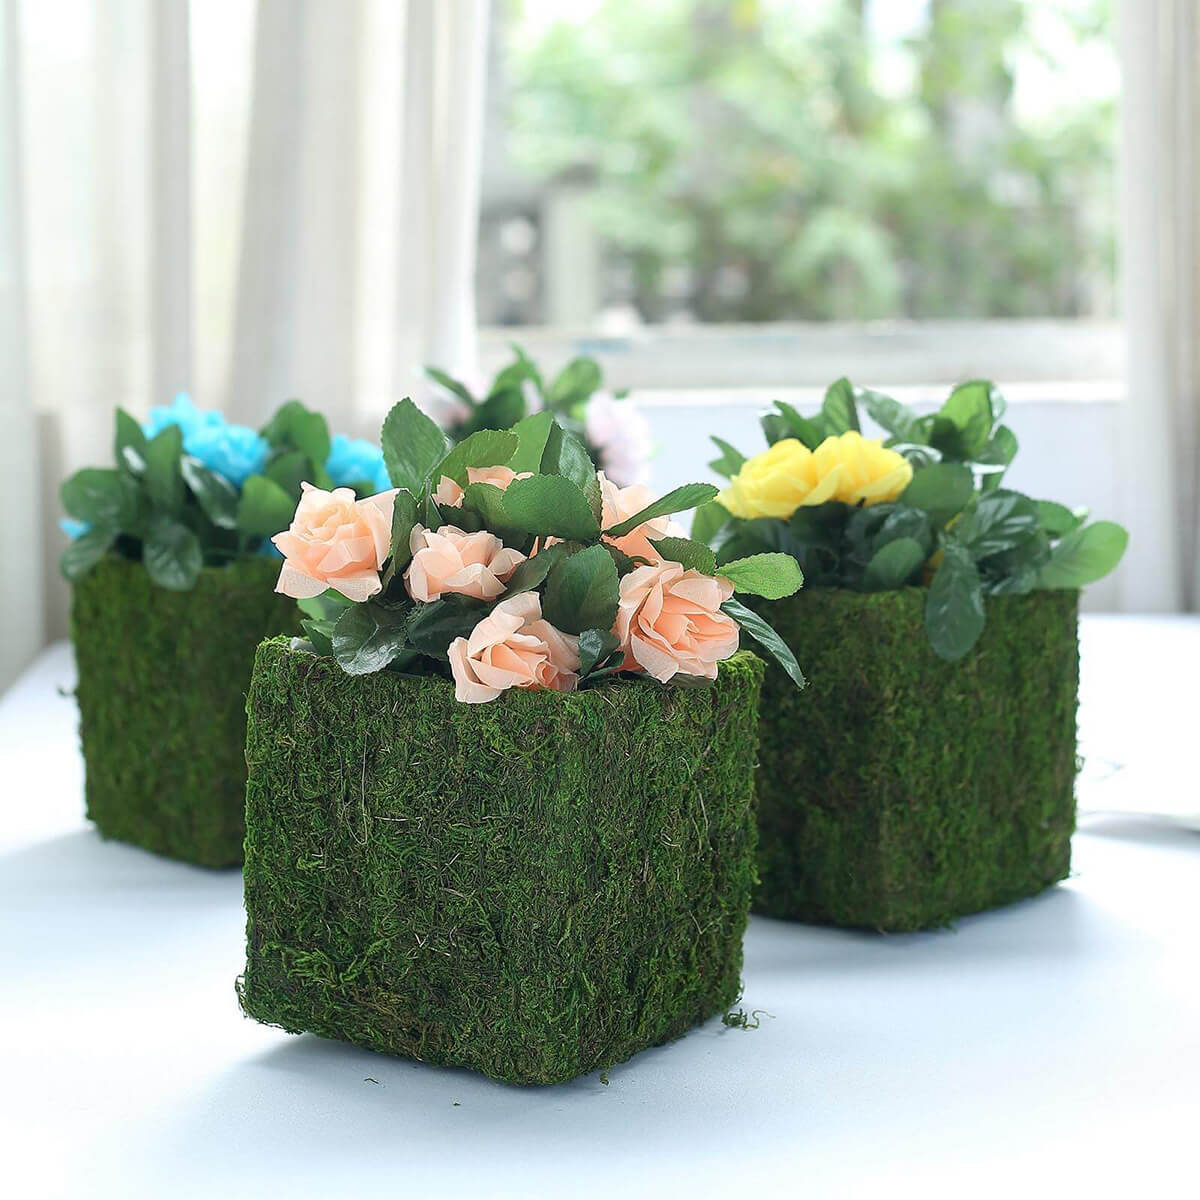 Natural Inspiration With Moss Covered Planters